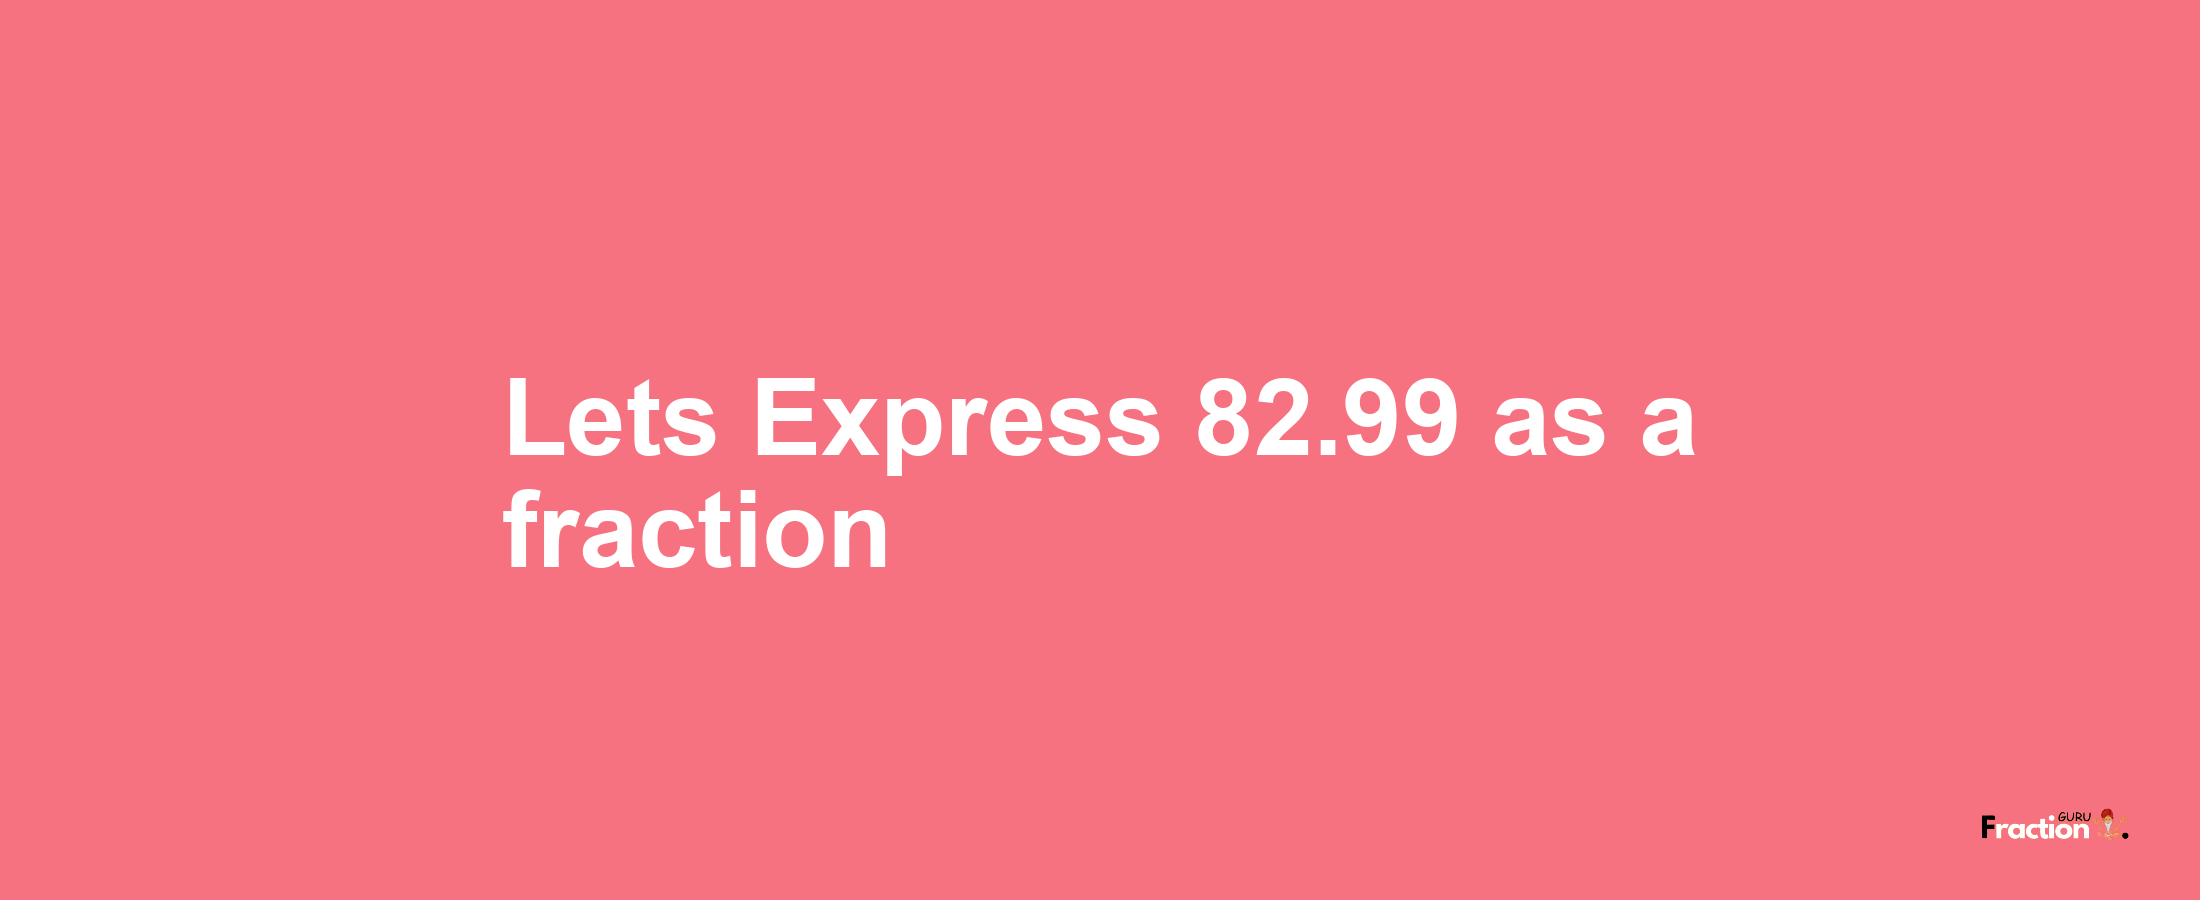 Lets Express 82.99 as afraction